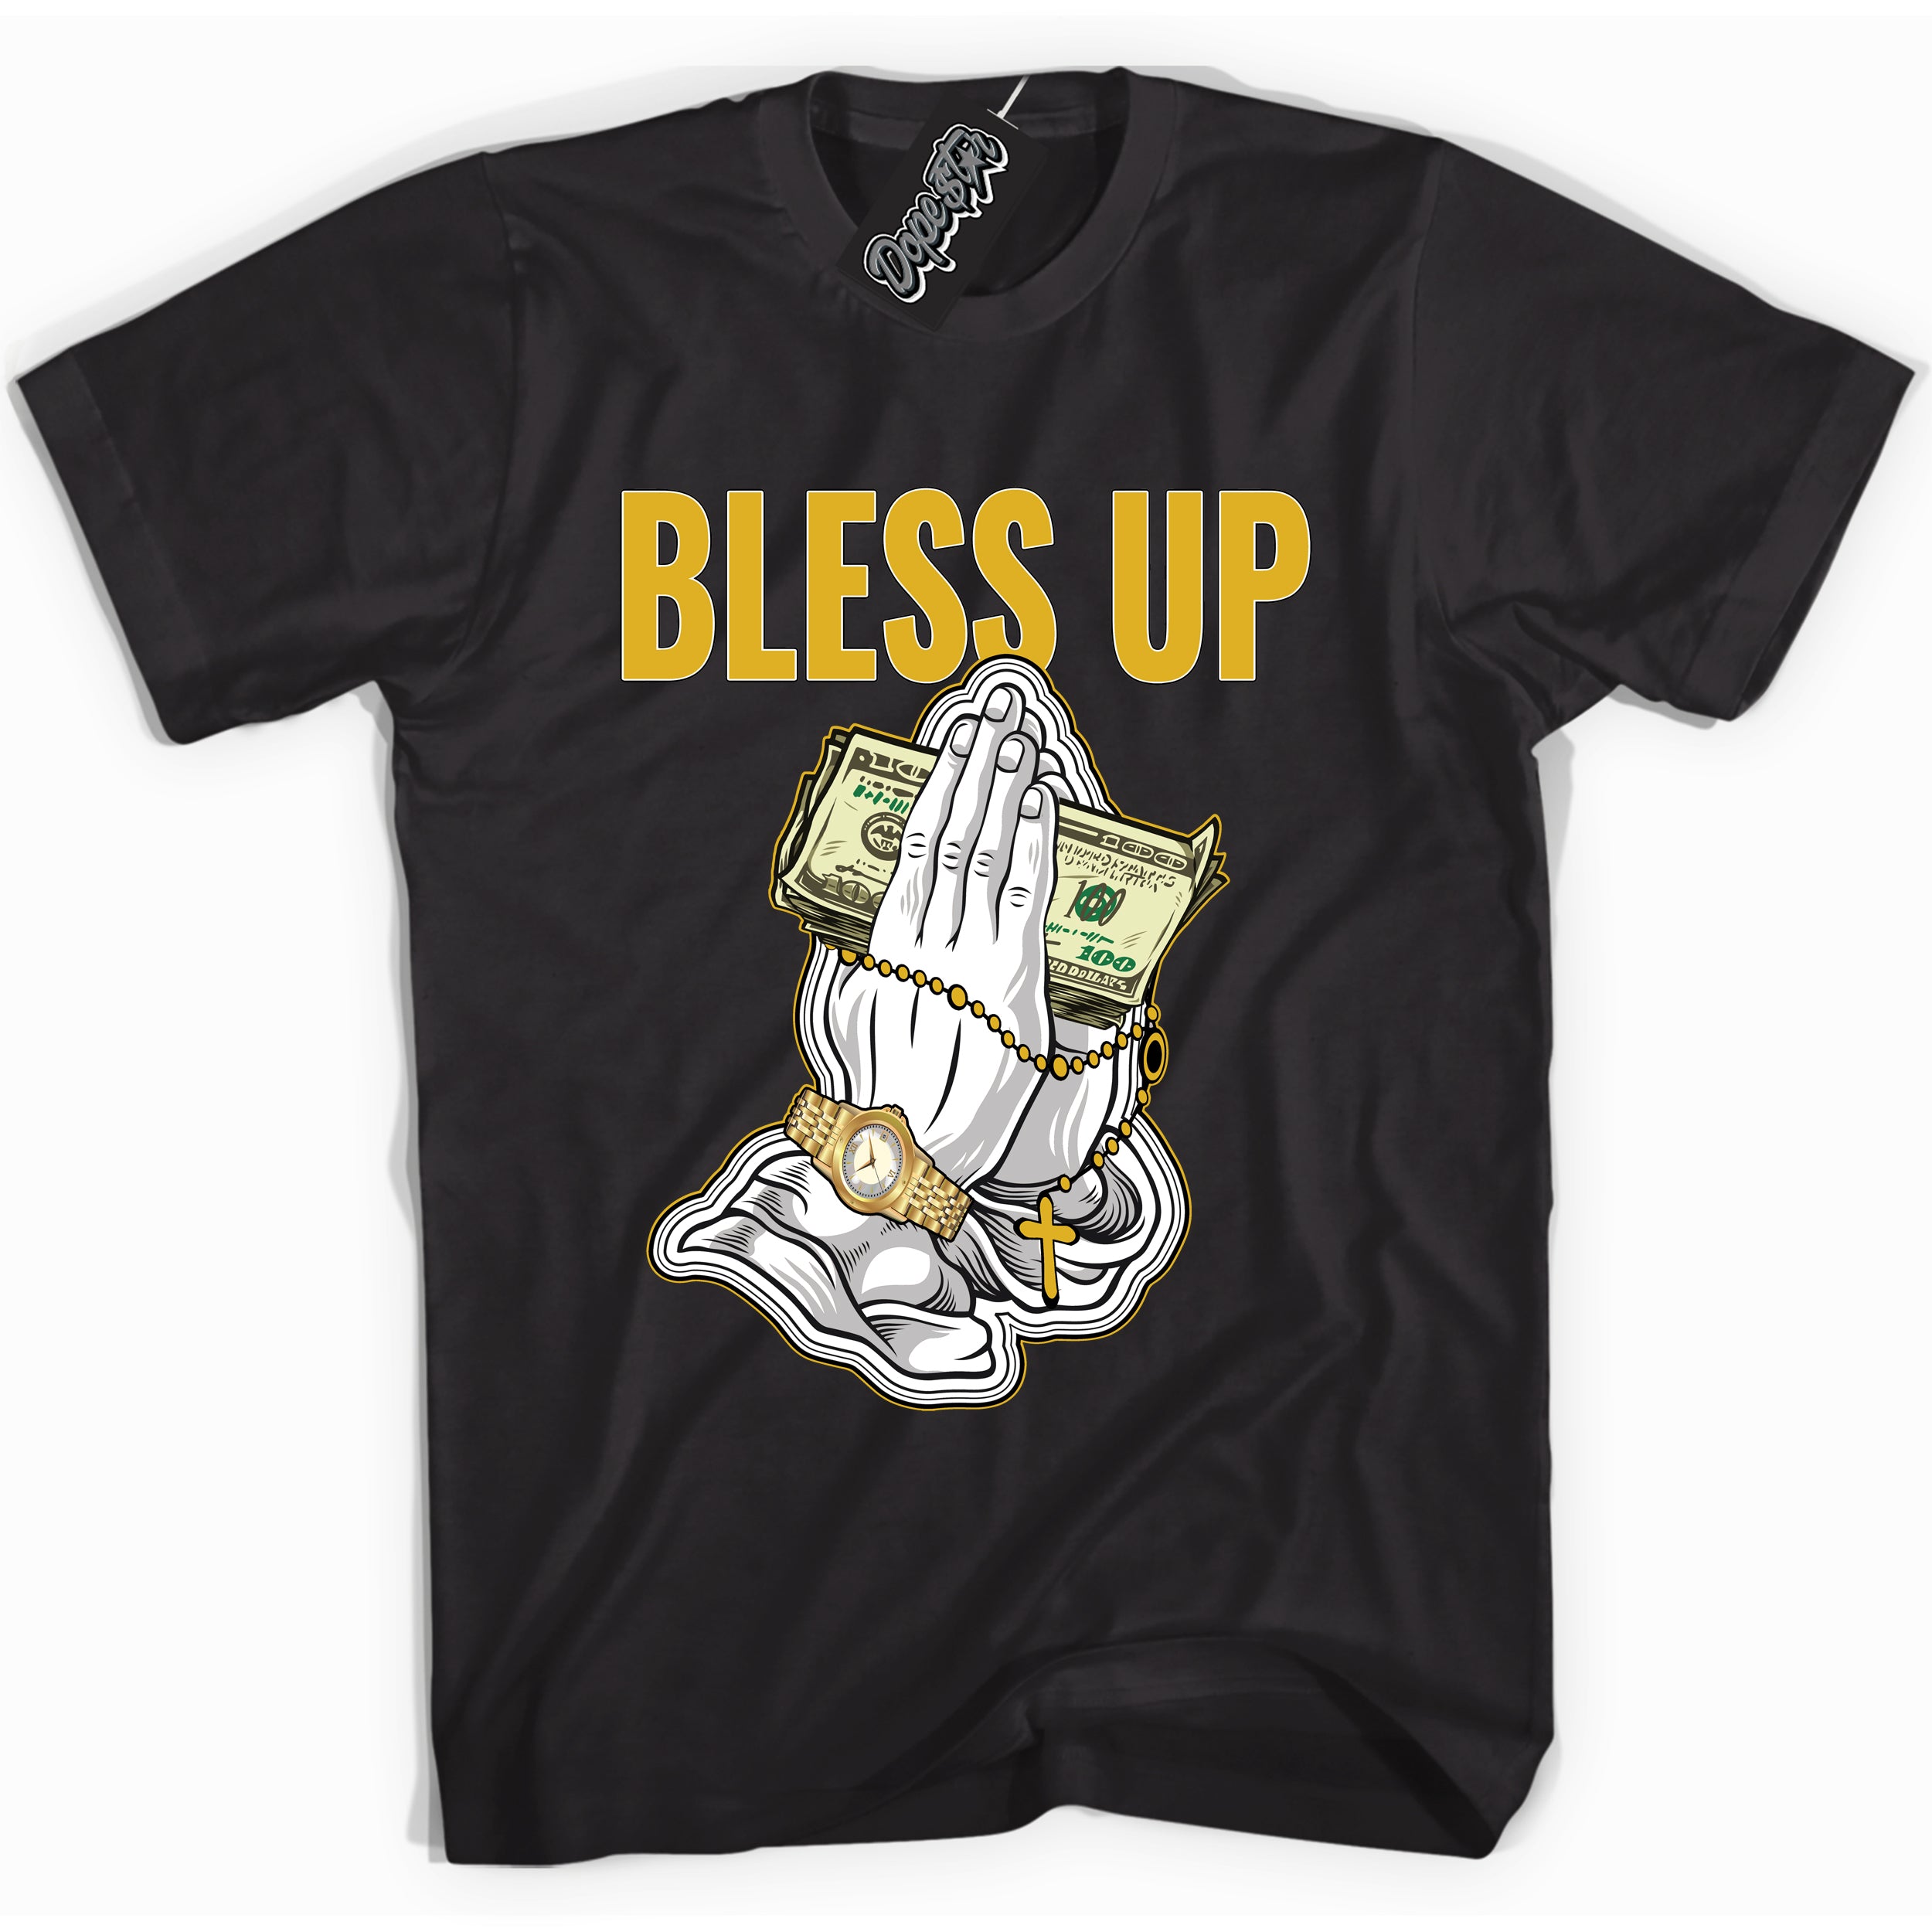 Cool Black Shirt with “ Bless Up ” design that perfectly matches Yellow Ochre 6s Sneakers.